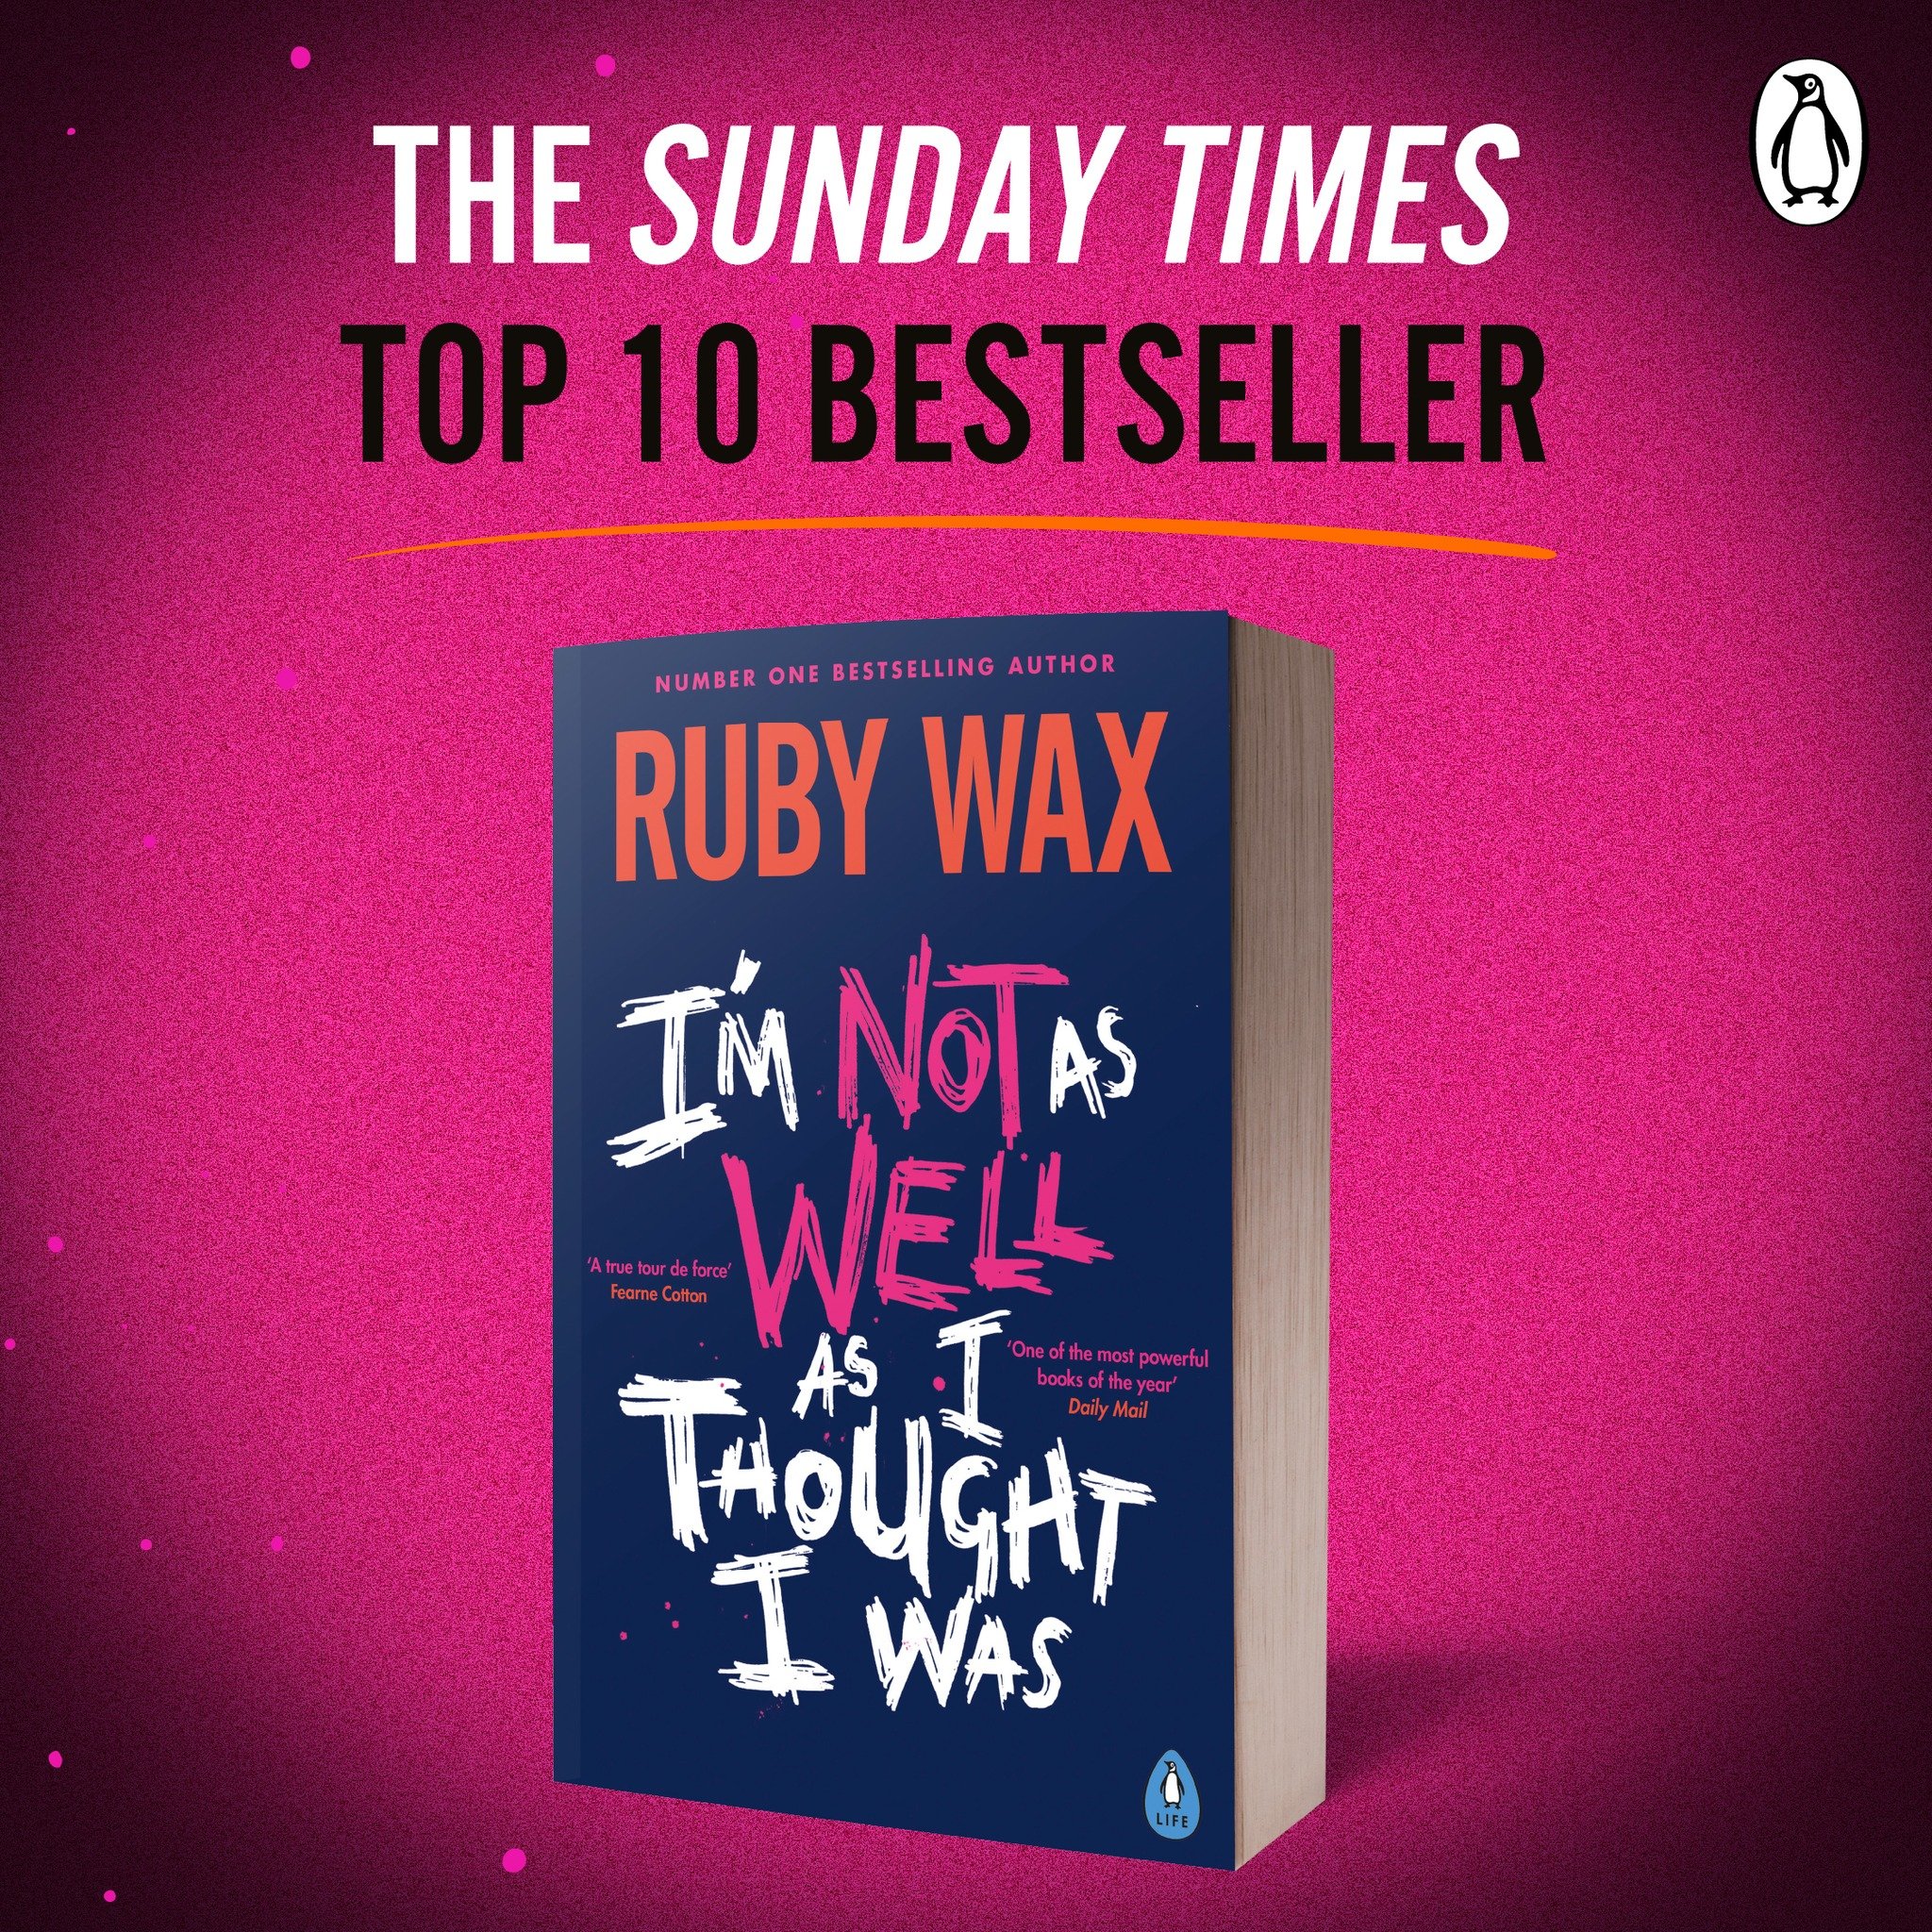 A little look back at some of our latest projects and campaigns ⚡️

⚡️ @rubywax - I'm Not As Well As I Thought I Was - Social media management and client liaison for the paperback release

⚡️ Celebrity Big Brother - Live content creation and communit